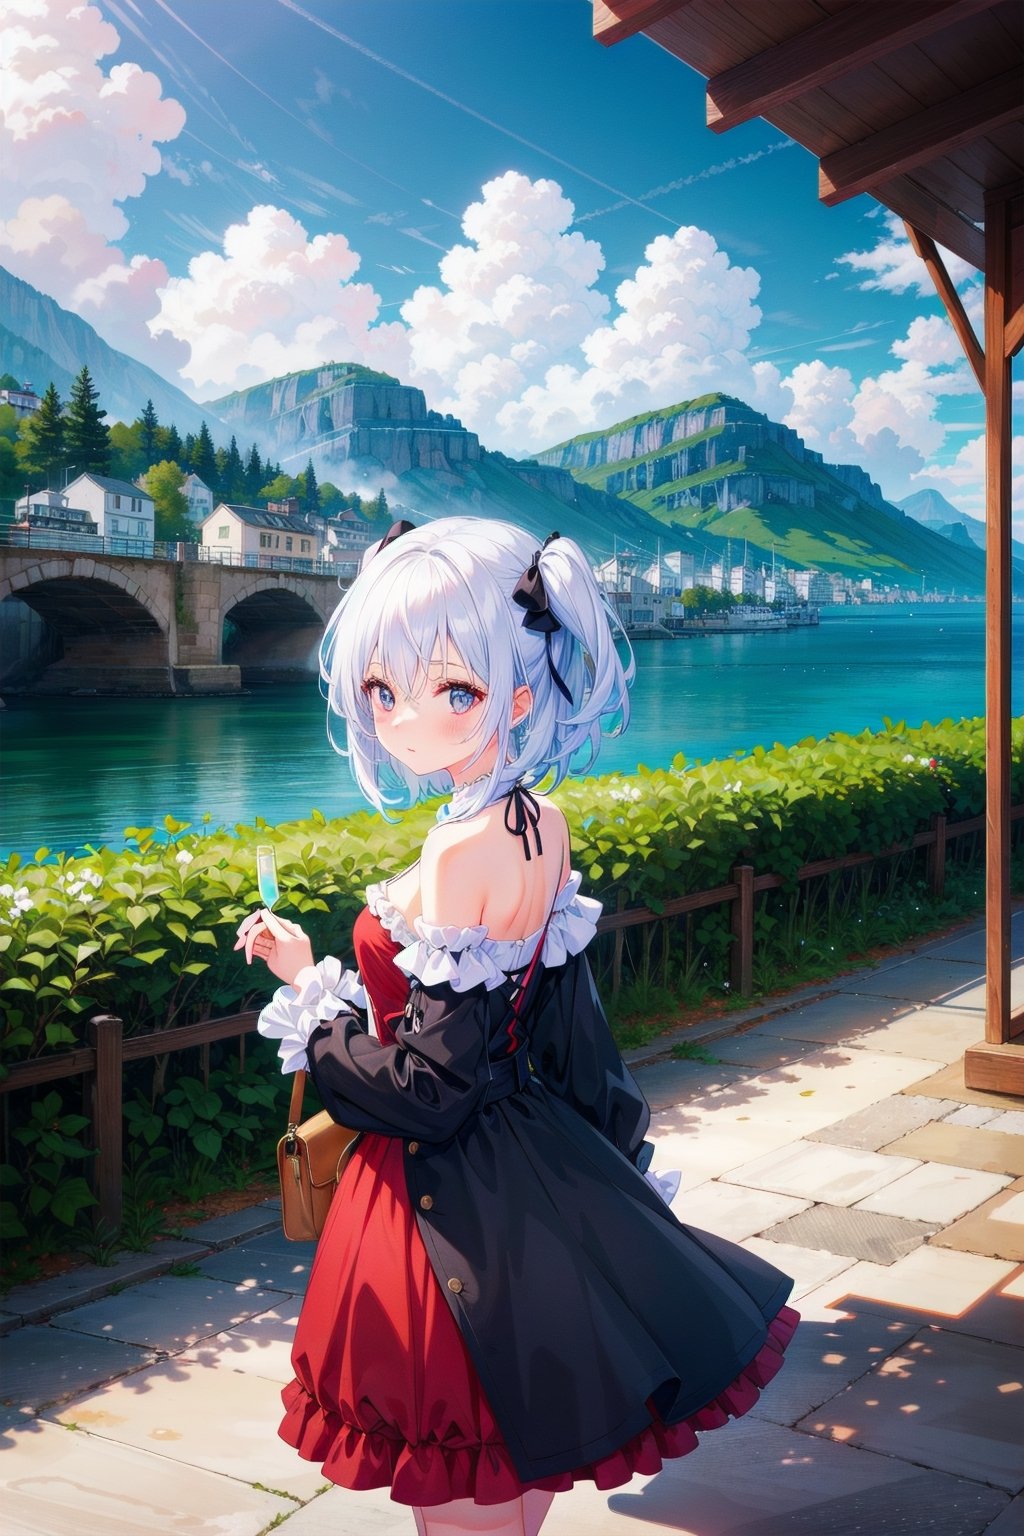 1 girl, solo, chemise dress, scenery, frill dress, masterpiece, high_res, best quslity, hdr, 